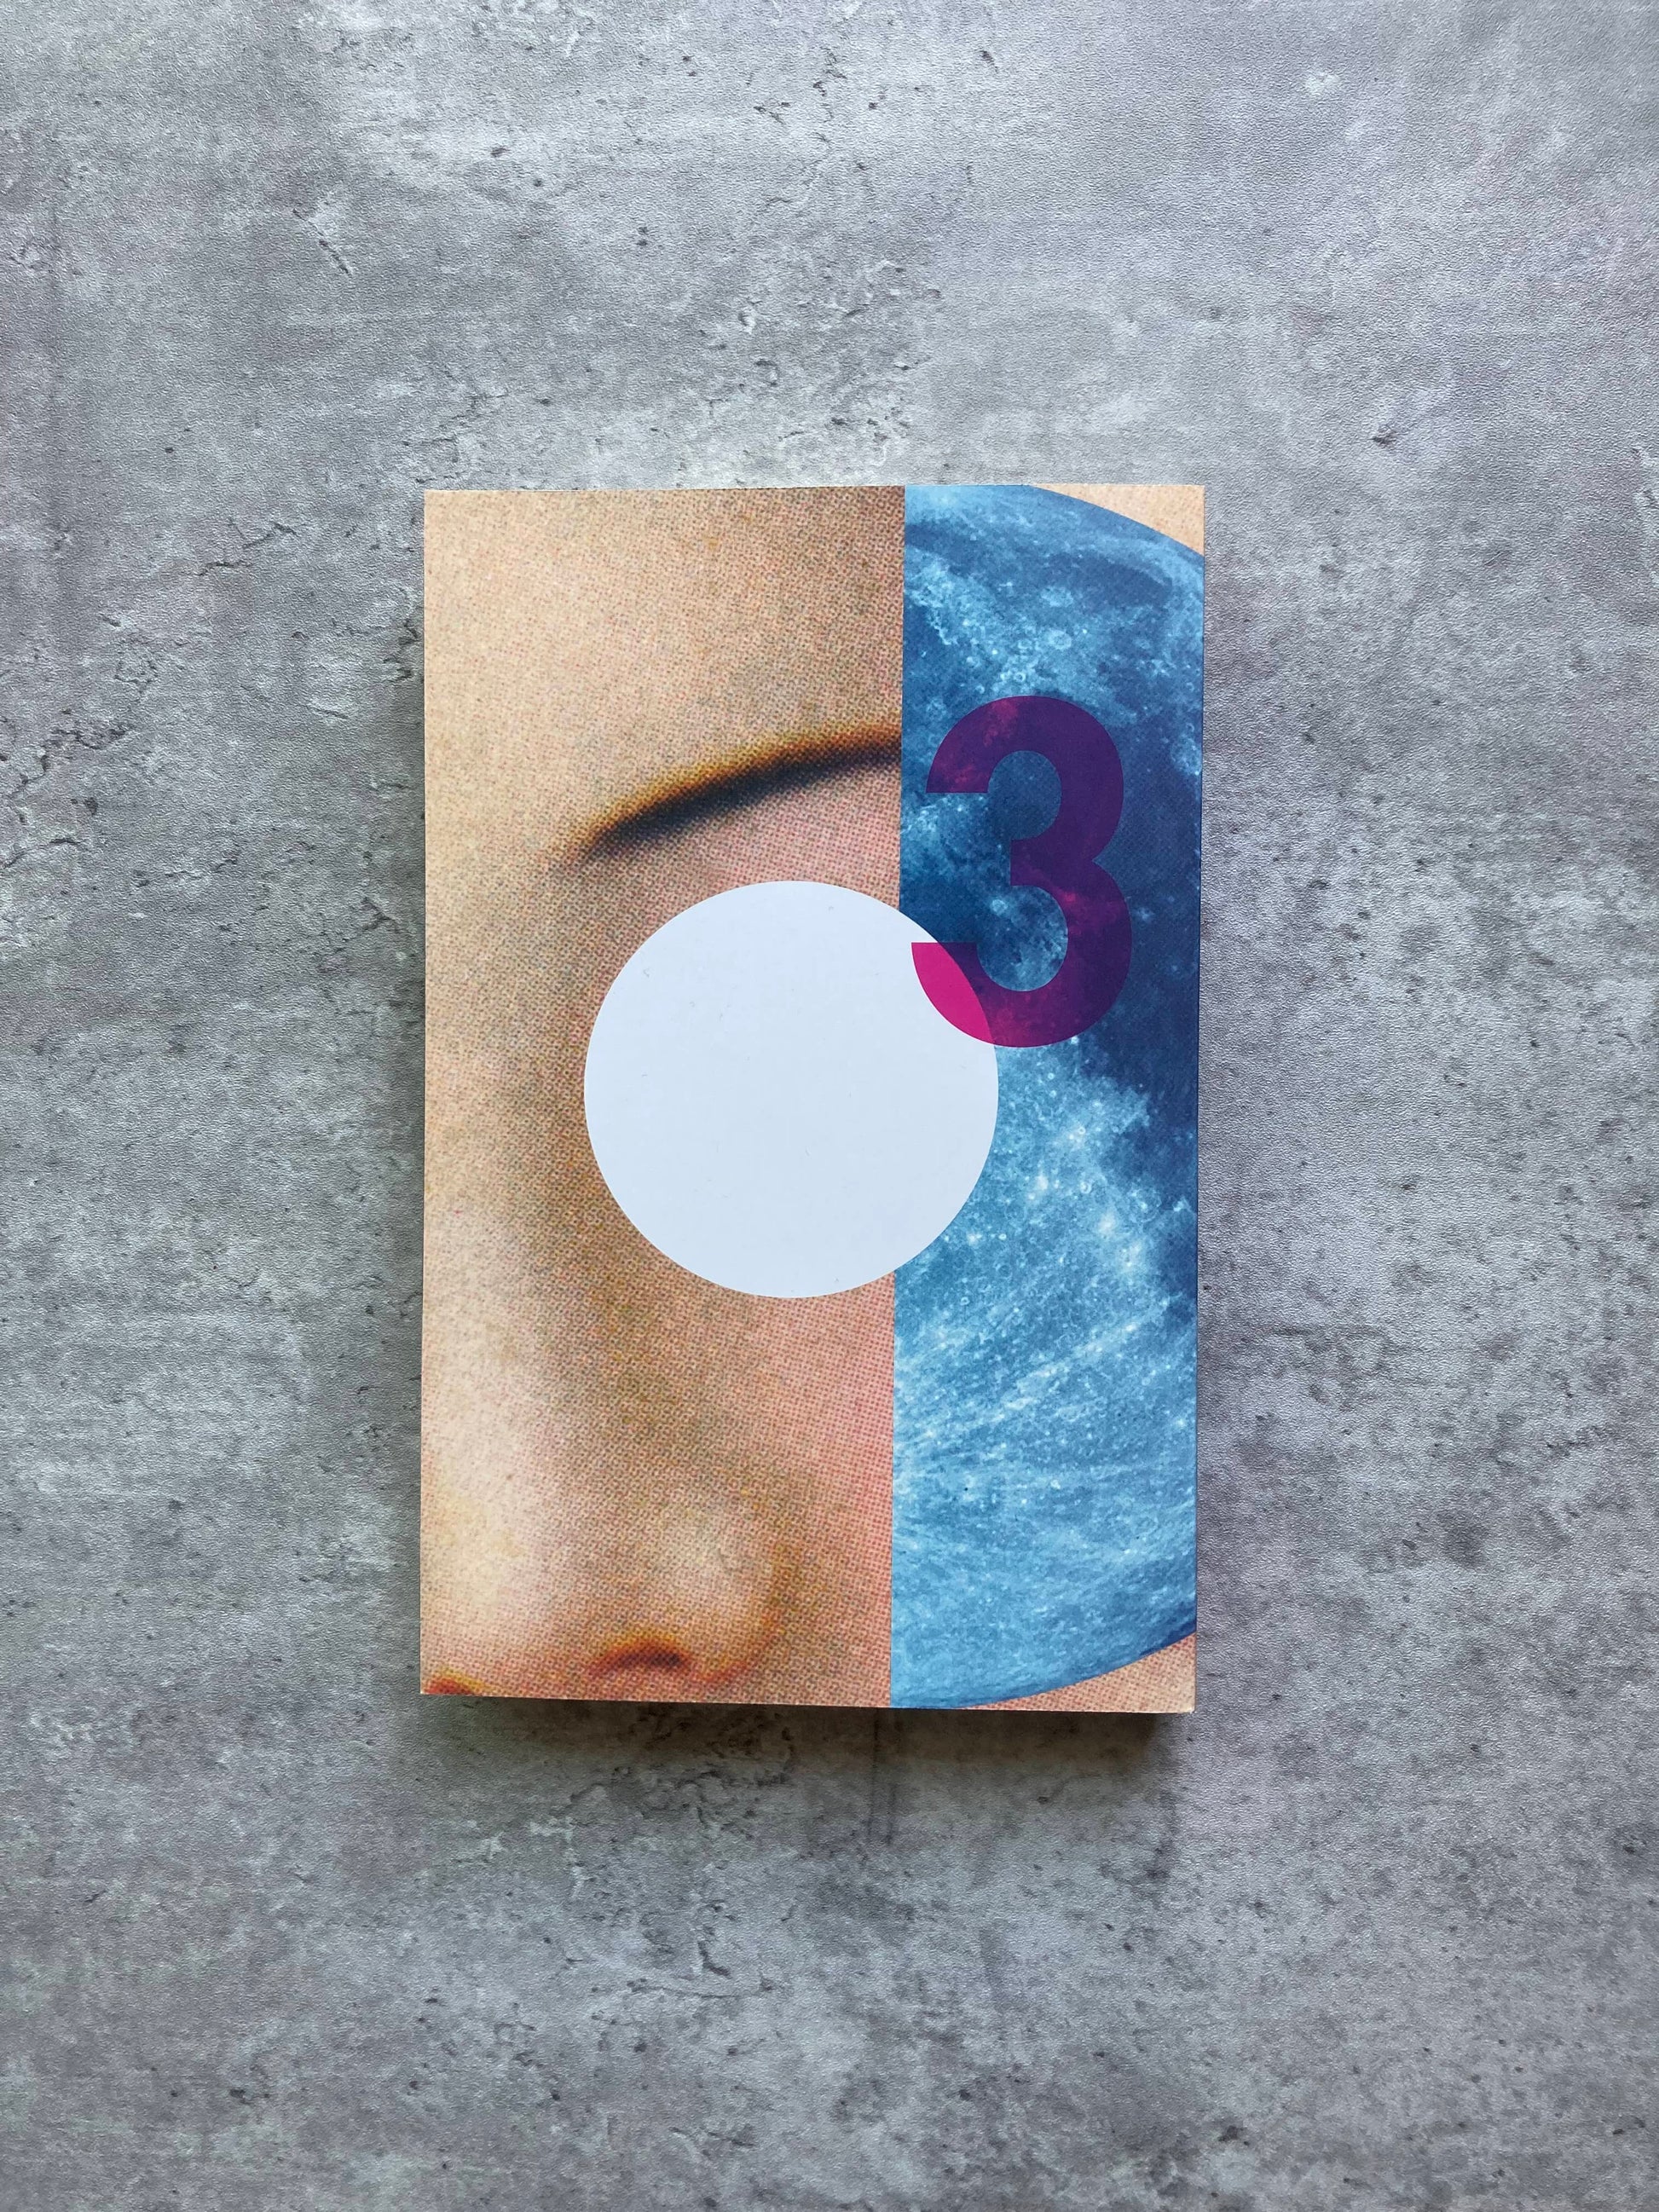 Boxed set of Haruki Murakami's 1Q84. Shop all new and used books online at The Stone Circle, the only online bookstore in Los Angeles, California. 